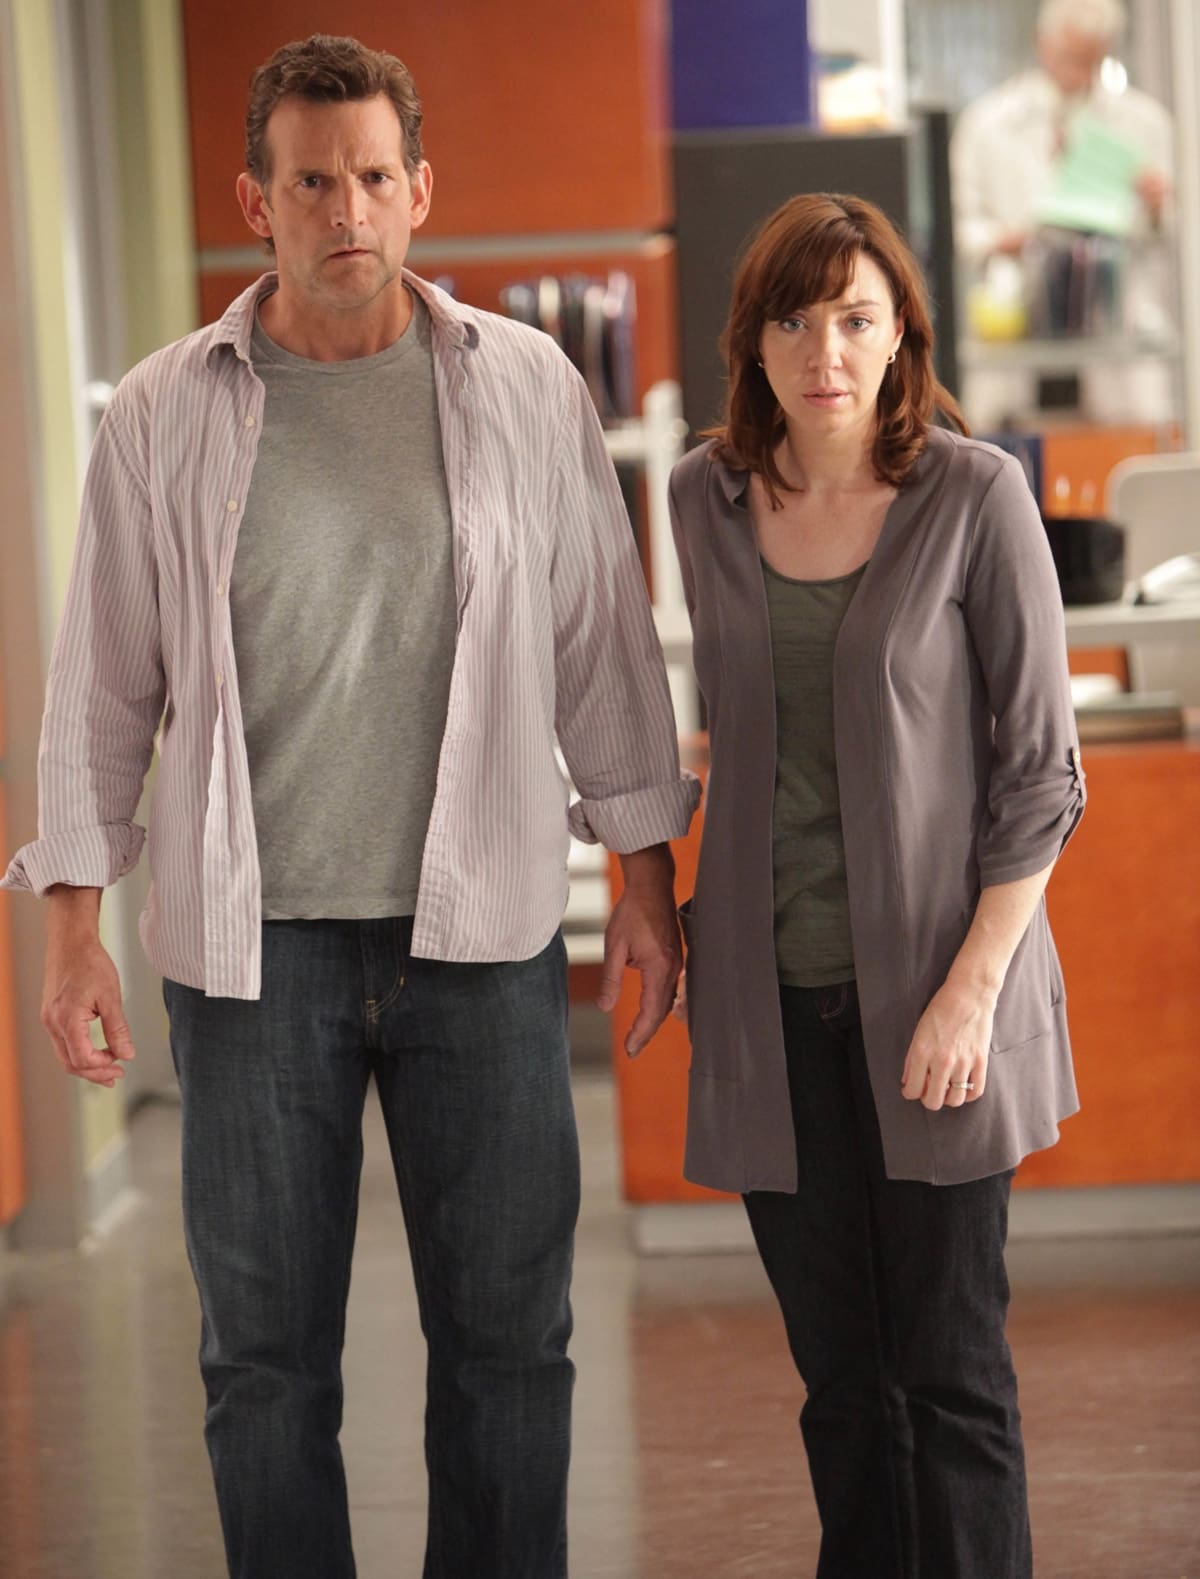 Dwier Brown as George and Stephanie Courtney as Claire in House